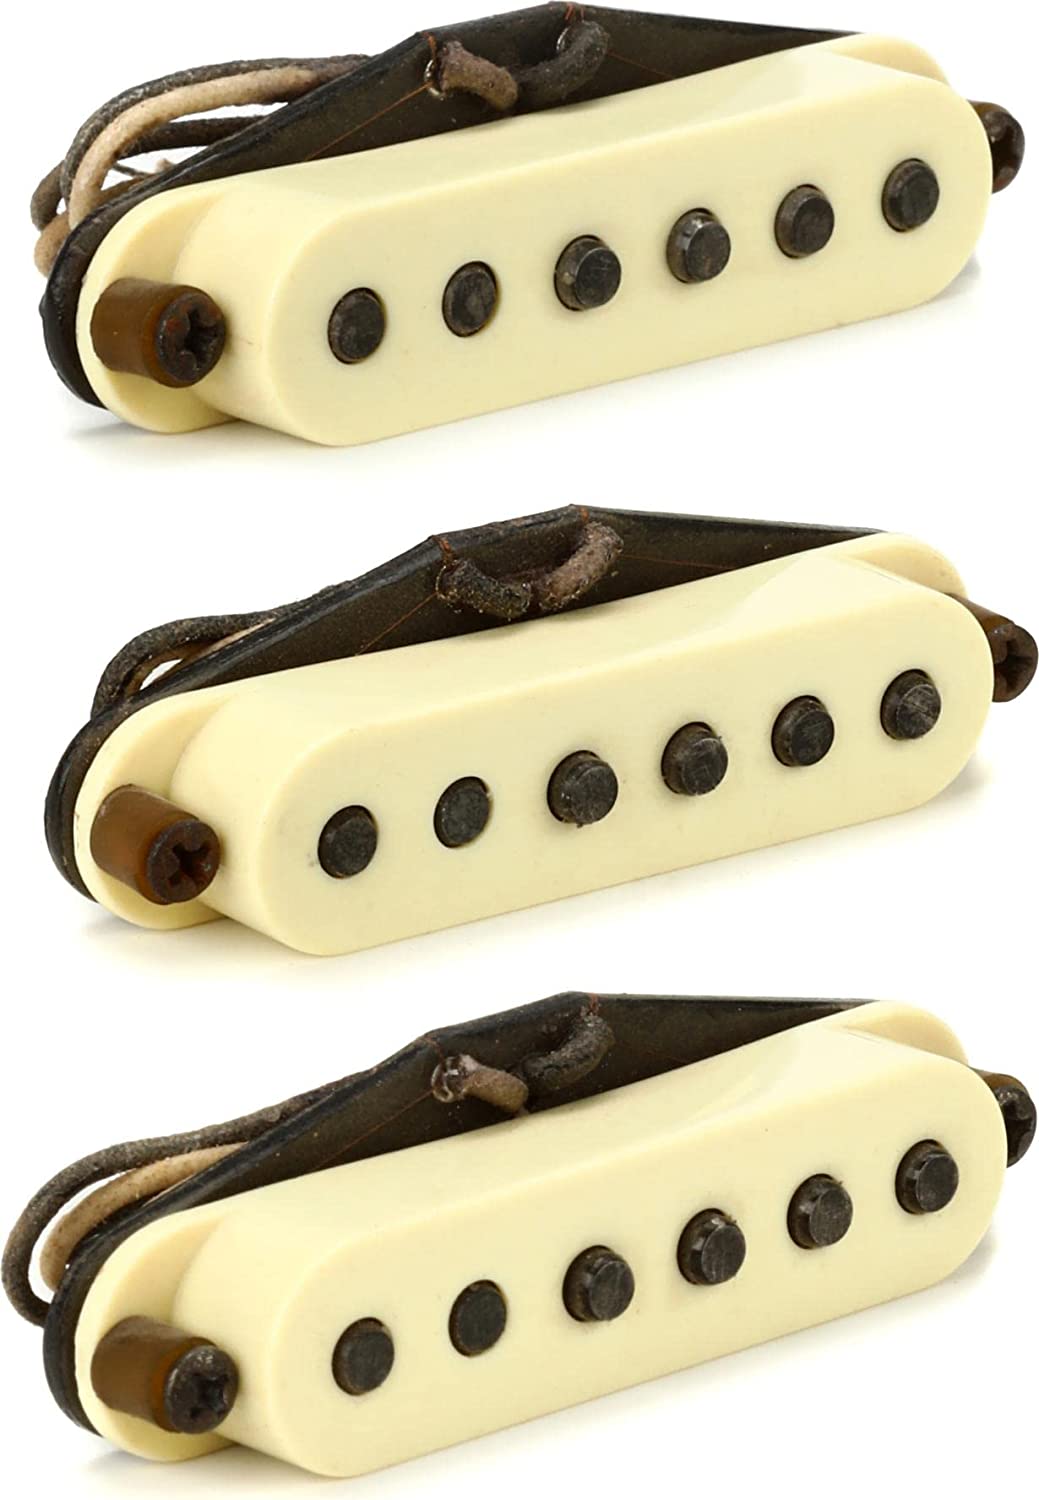 Seymour Duncan Antiquity Texas Hot Strat Pickup on a white background